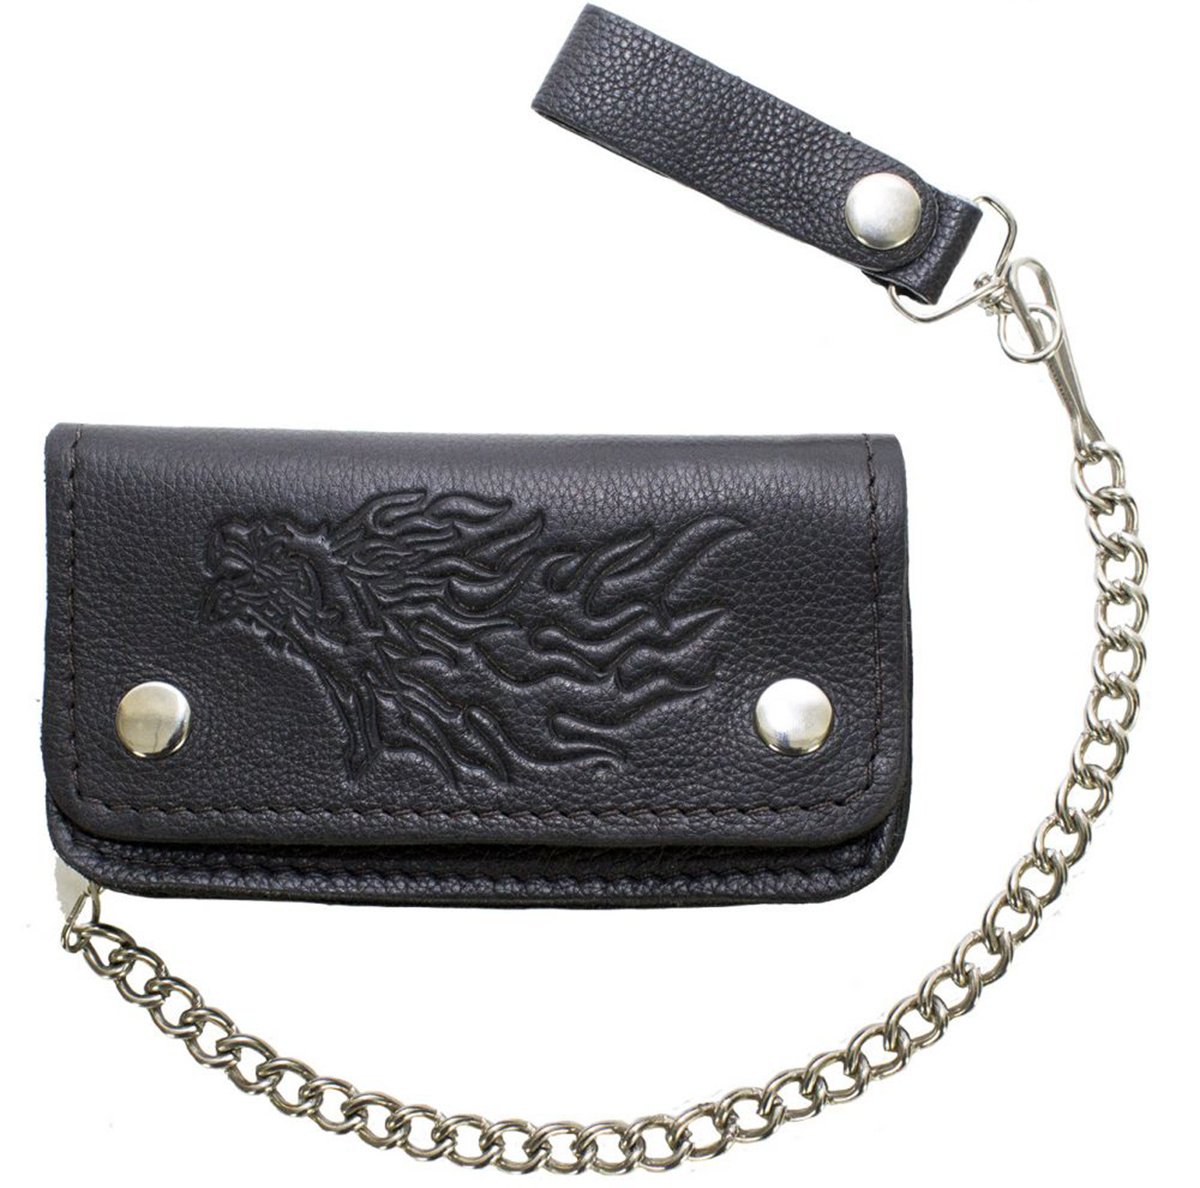 Leather Chain Wallet - Eagle and Flames Design - Black - Bifold - WALLET6-DL